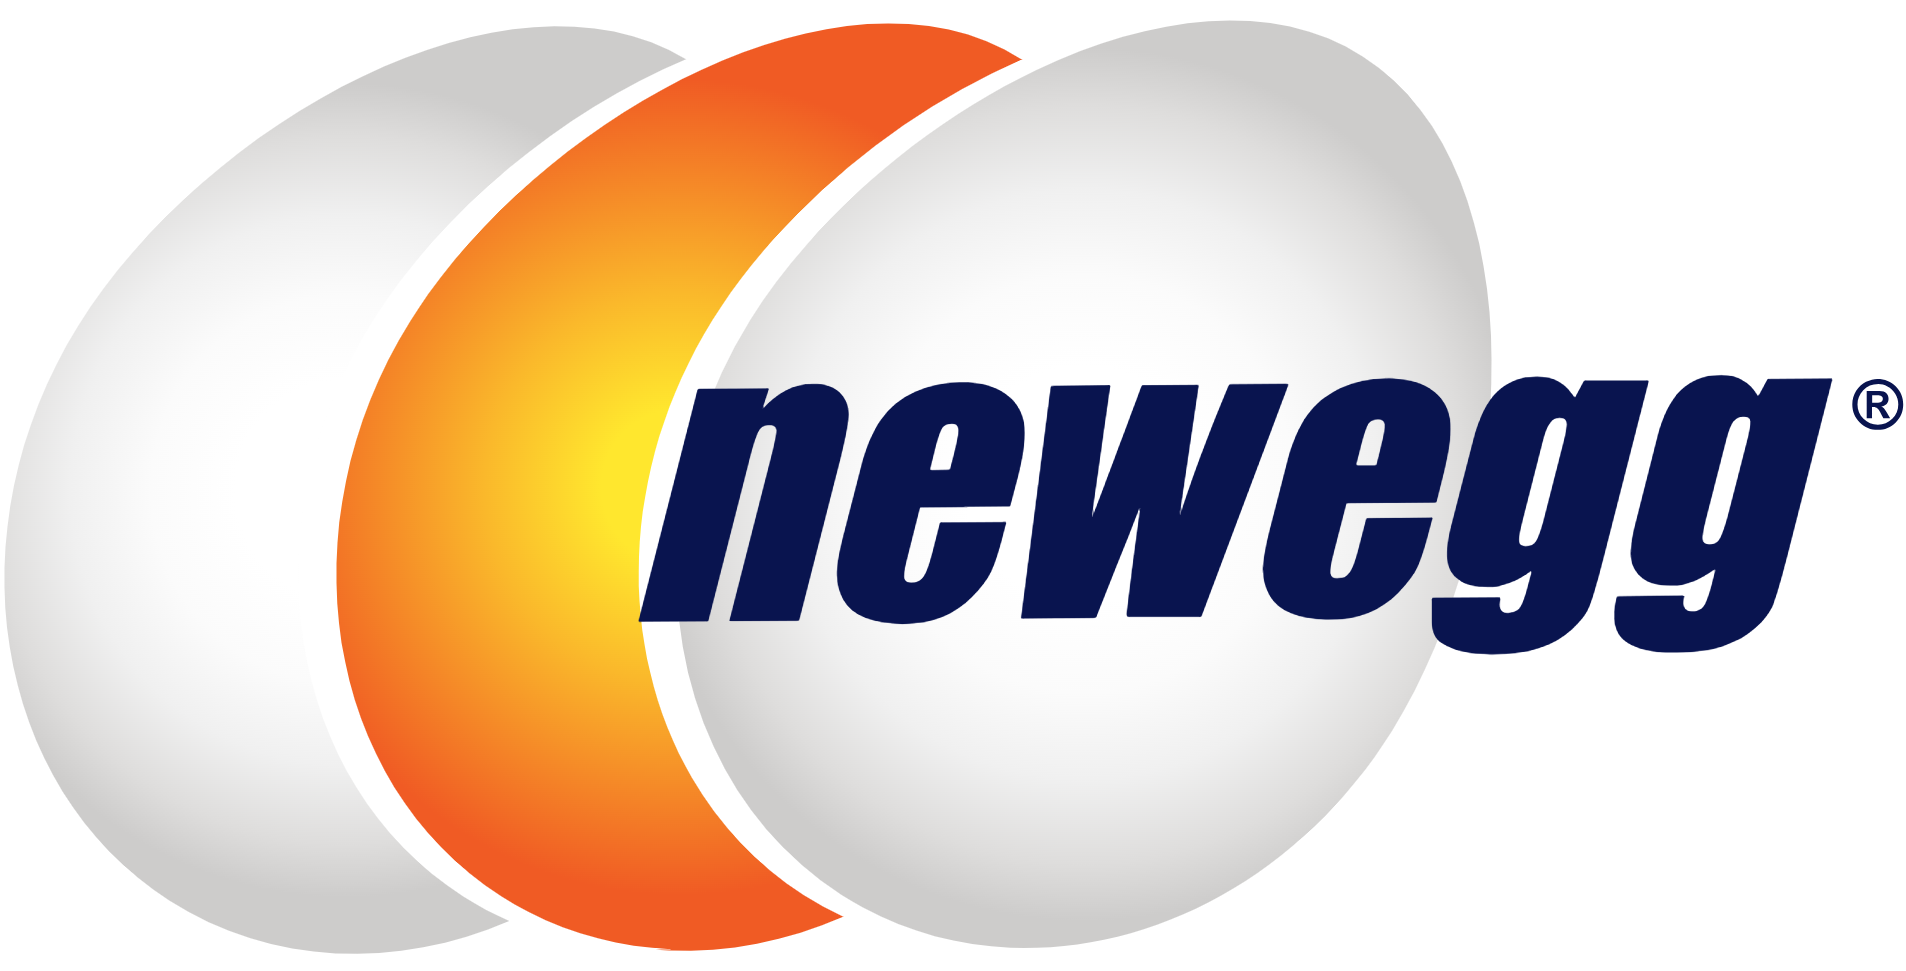 NEWEGG - 12% off (up to $100) on selected items by using Zip for payment w/ code ZIPFEST24